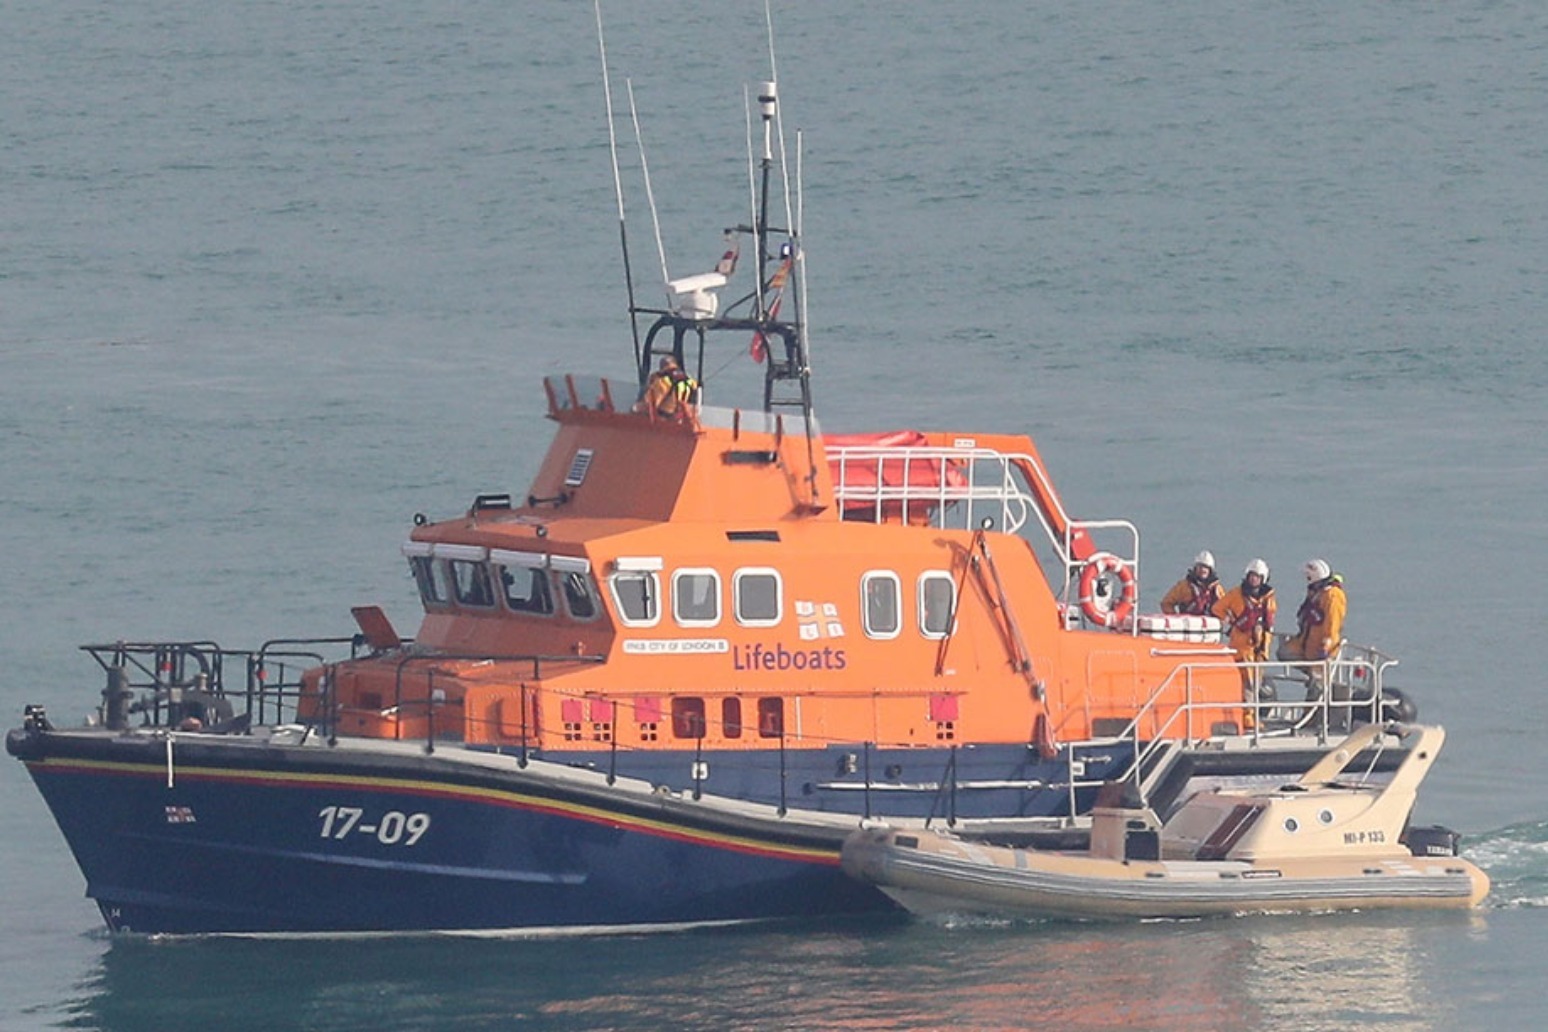 RNLI takes down its website after reporting ‘suspicious activity 